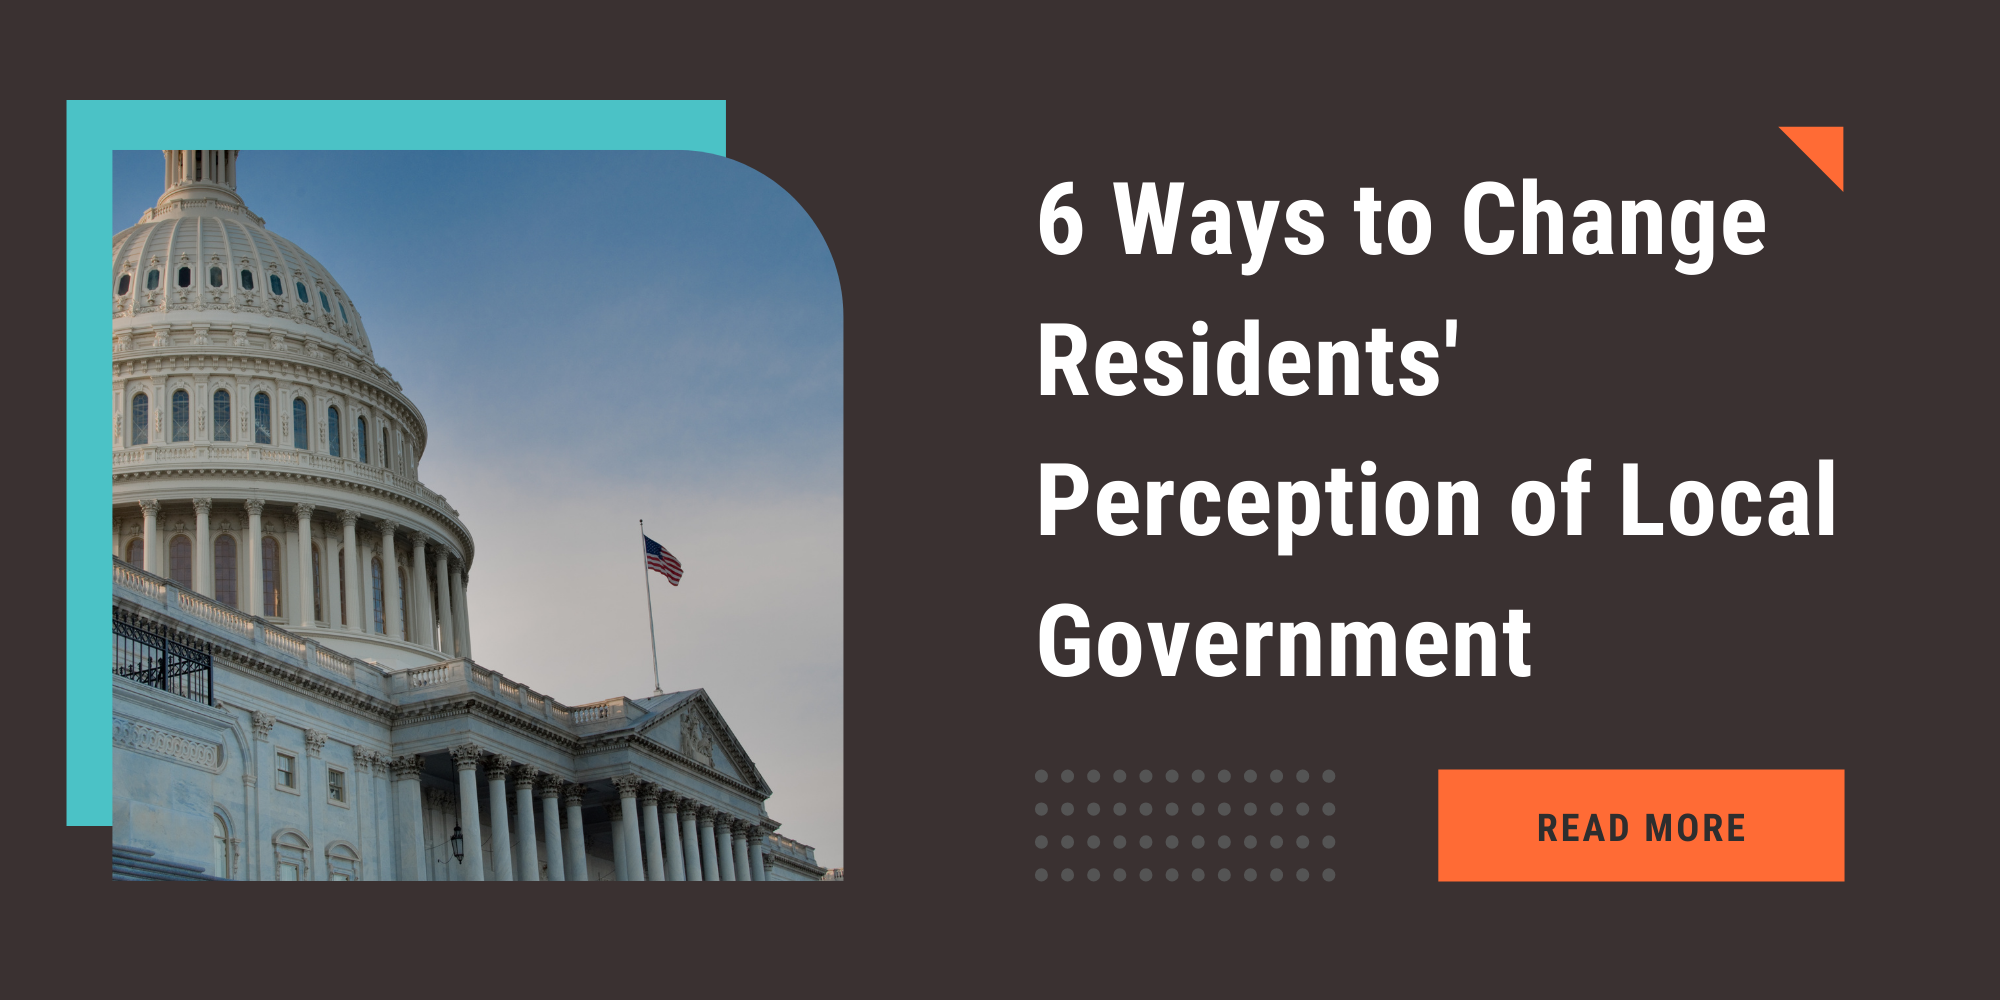 6 Ways to Change Residents’ Perception of Local Government